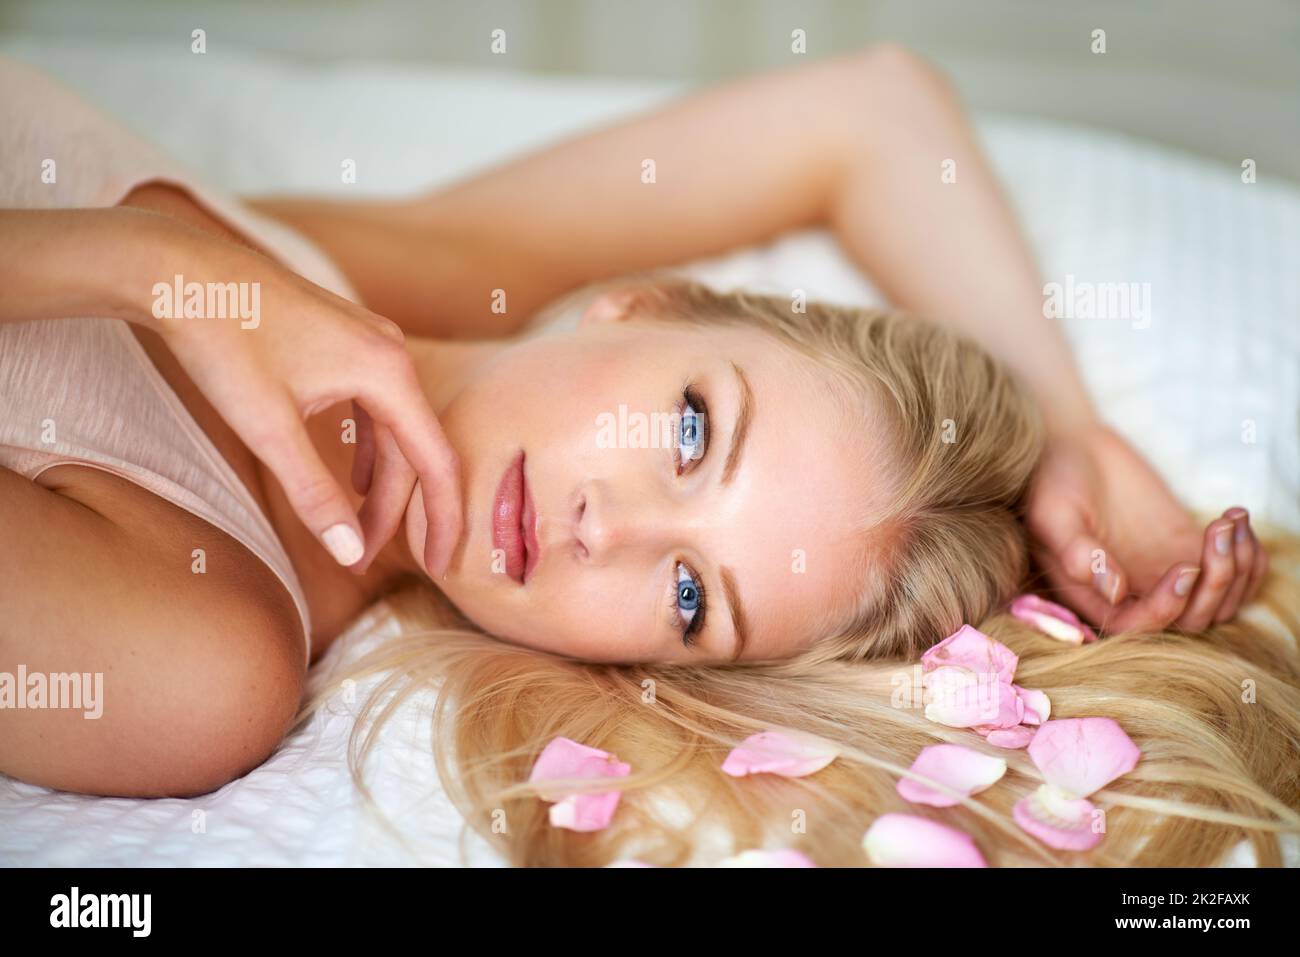 Pretty as a flower. Portrait of an attractive woman lying on her bed with rose petals in her hair. Stock Photo